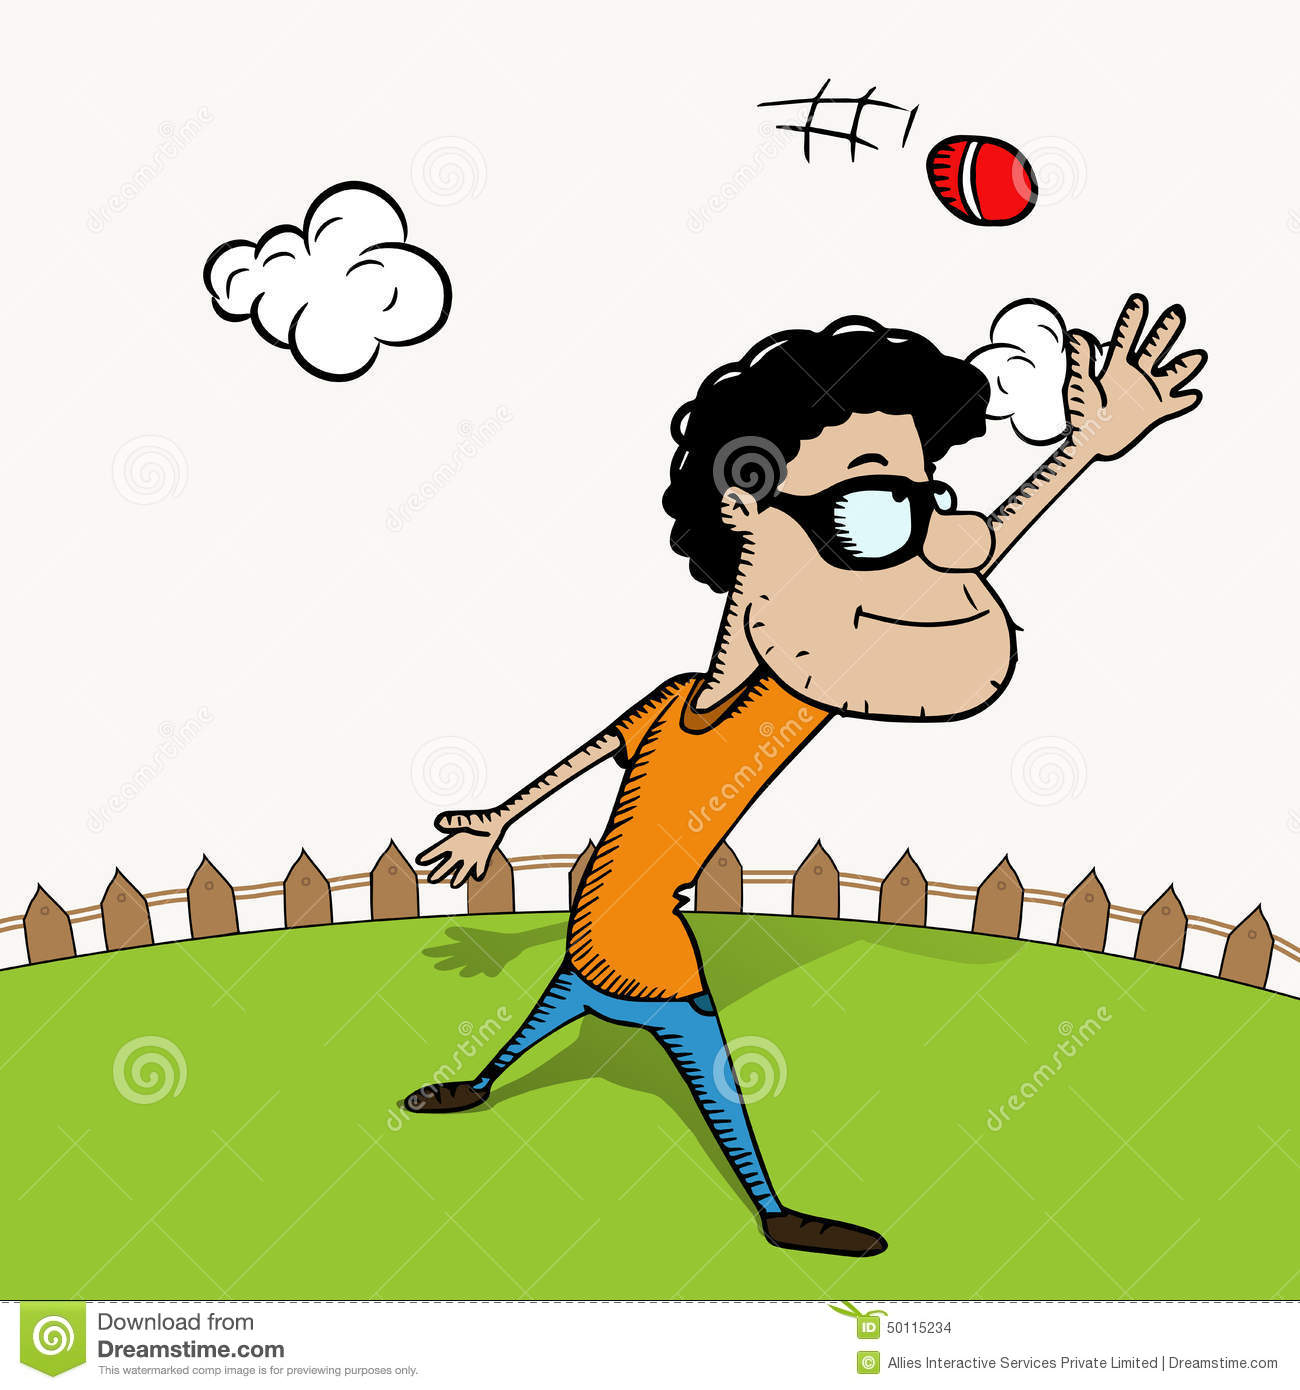 Funny cartoon with ball for cricket illustration